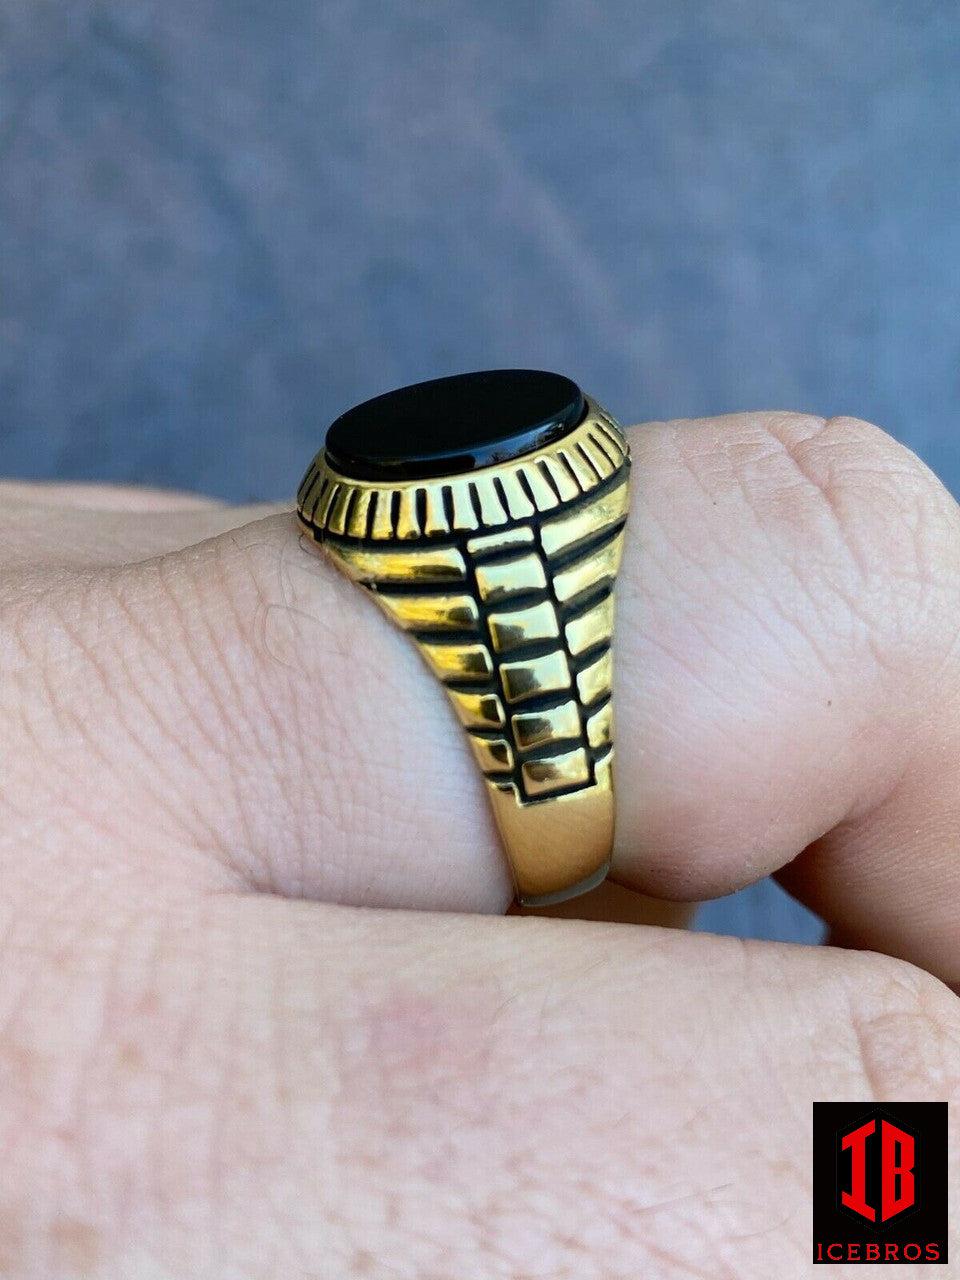 Men 14k Gold Over Real Solid 925 Sterling Silver Black Onyx Round Signet Ring